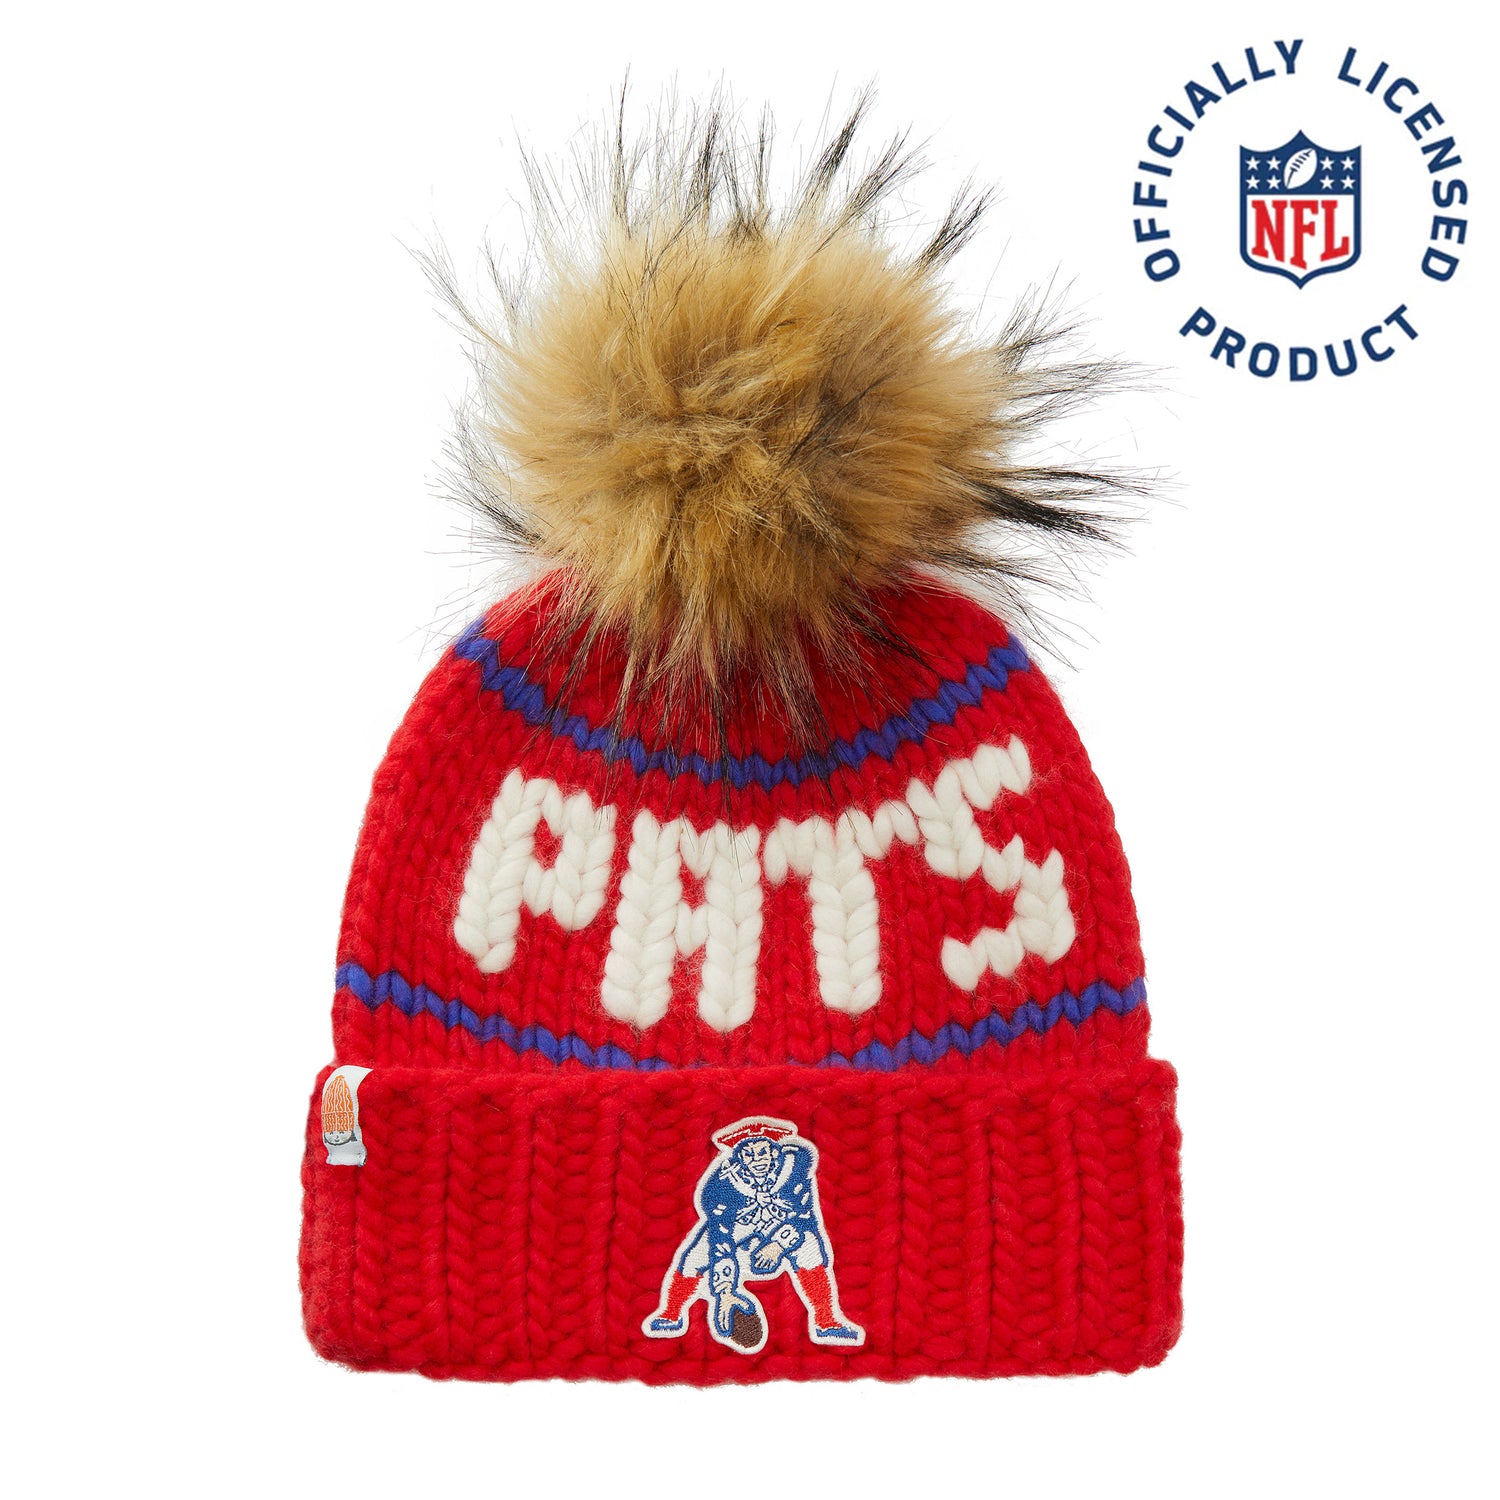 The Retro NFL Pats Beanie with Faux Fur Pom